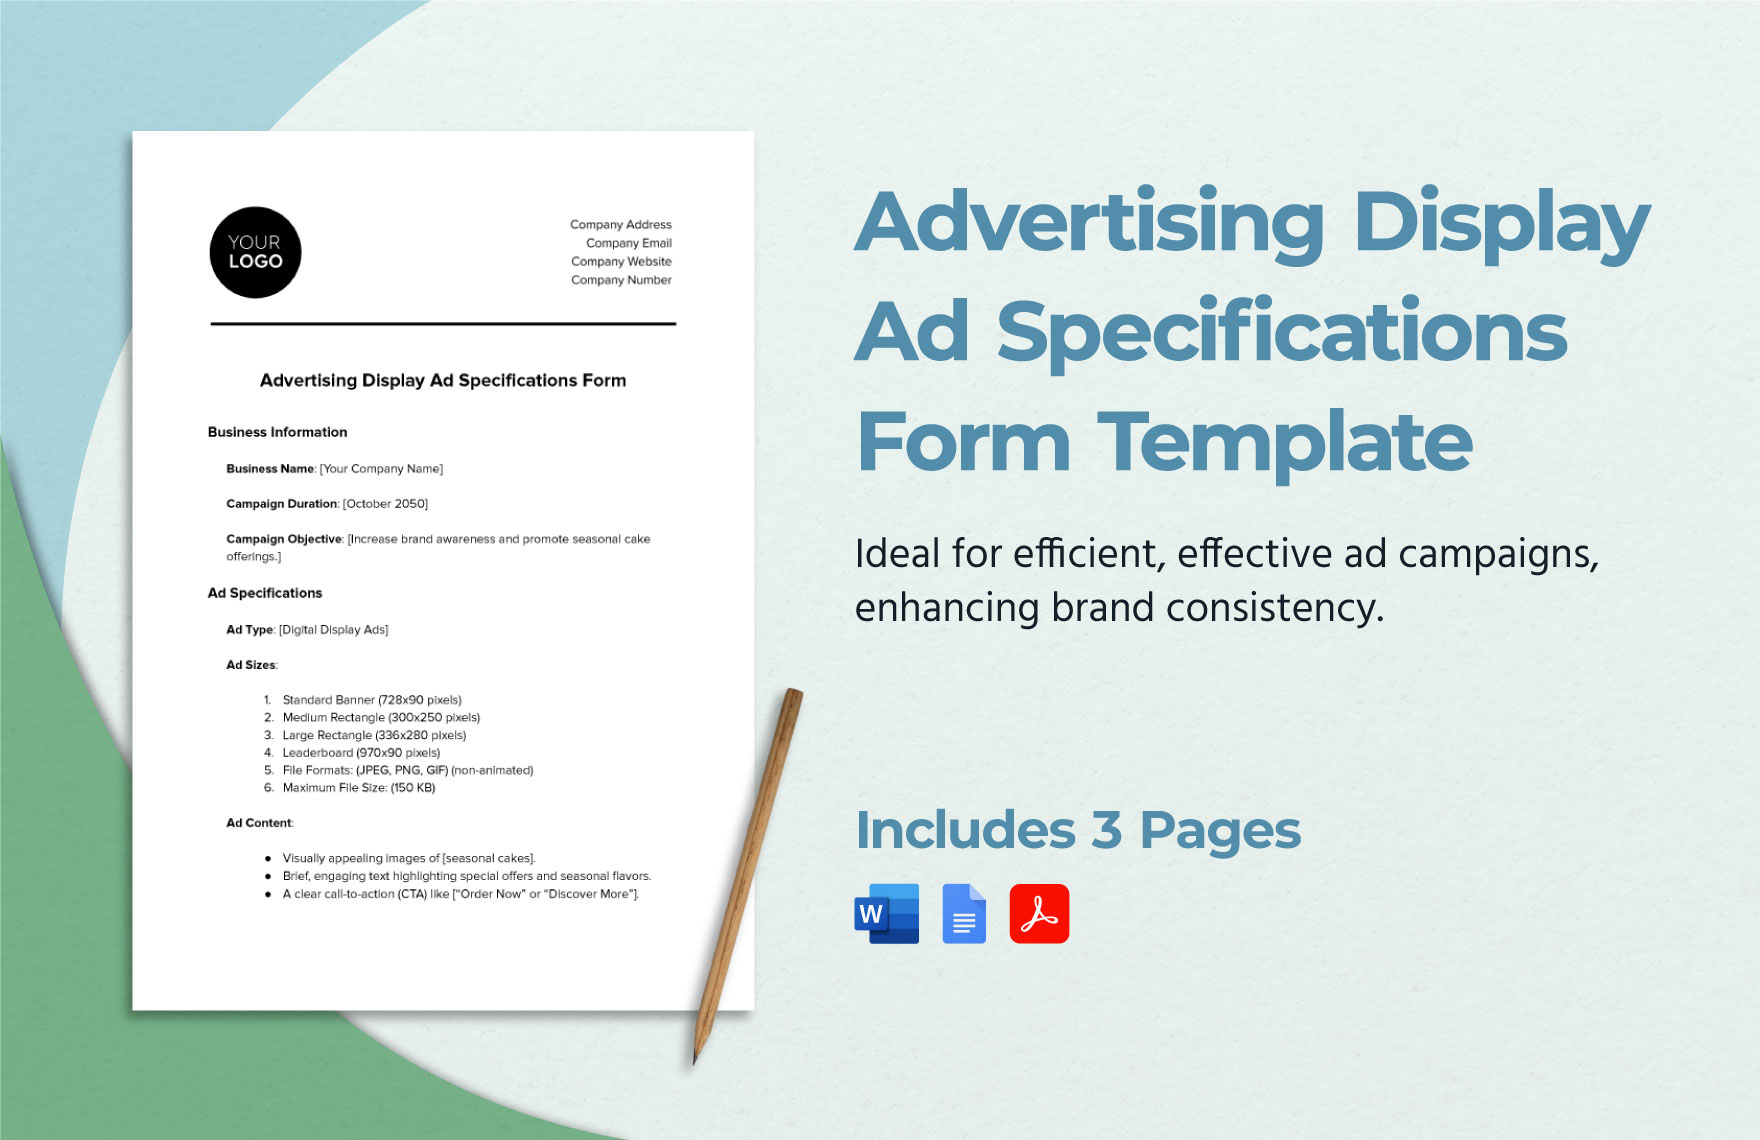 Advertising Display Ad Specifications Form Template in Word, Google Docs, PDF